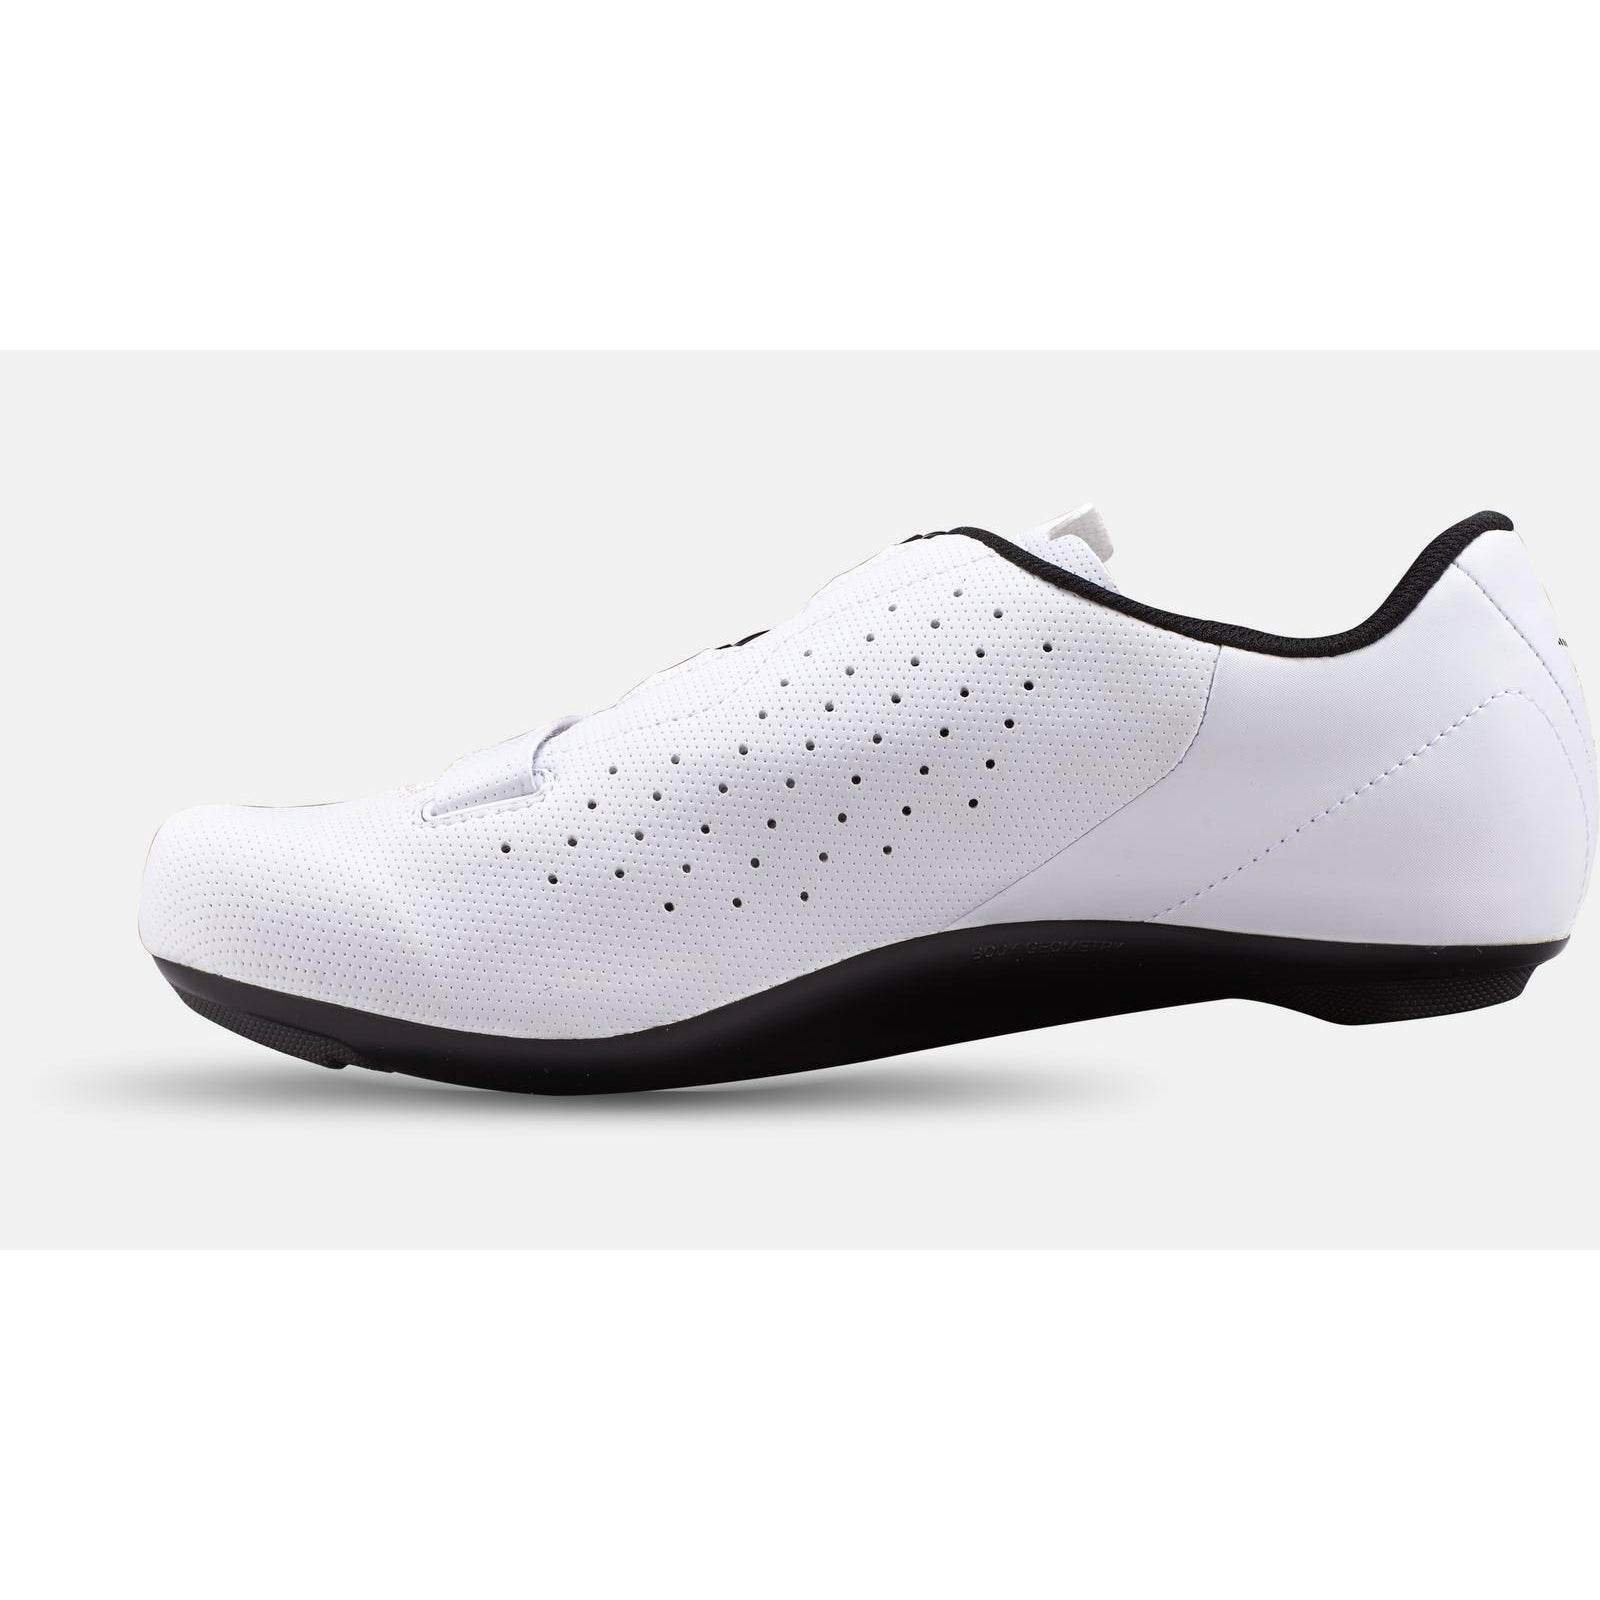 Specialized Torch 1.0 Road Bike Shoes - Shoes - Bicycle Warehouse